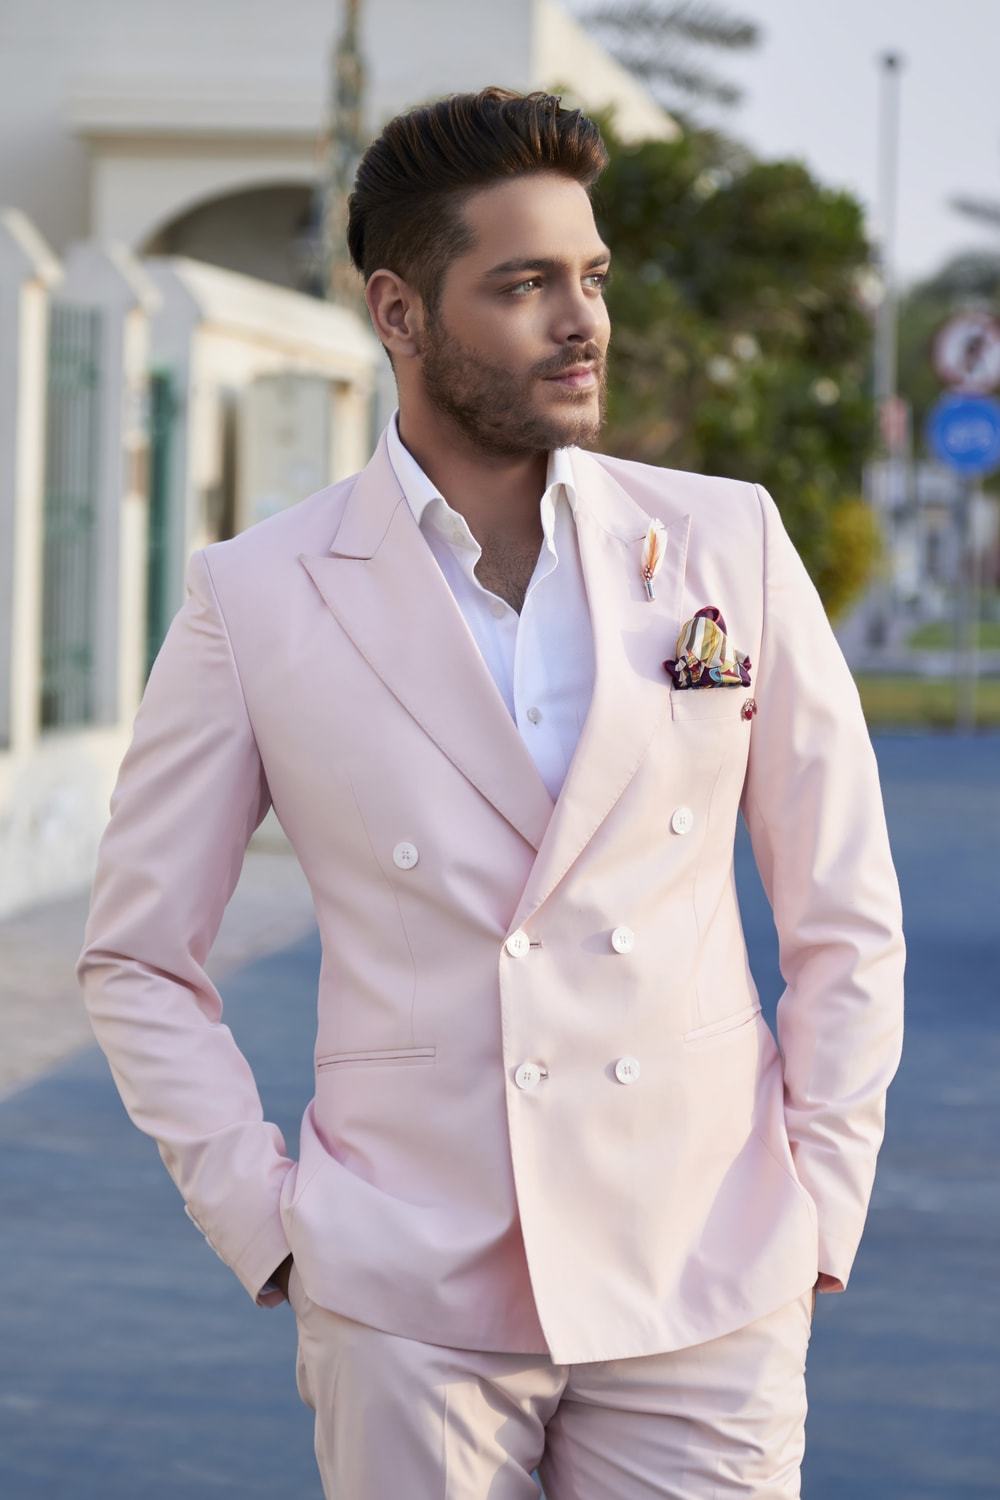 Pink Double Breasted Suit